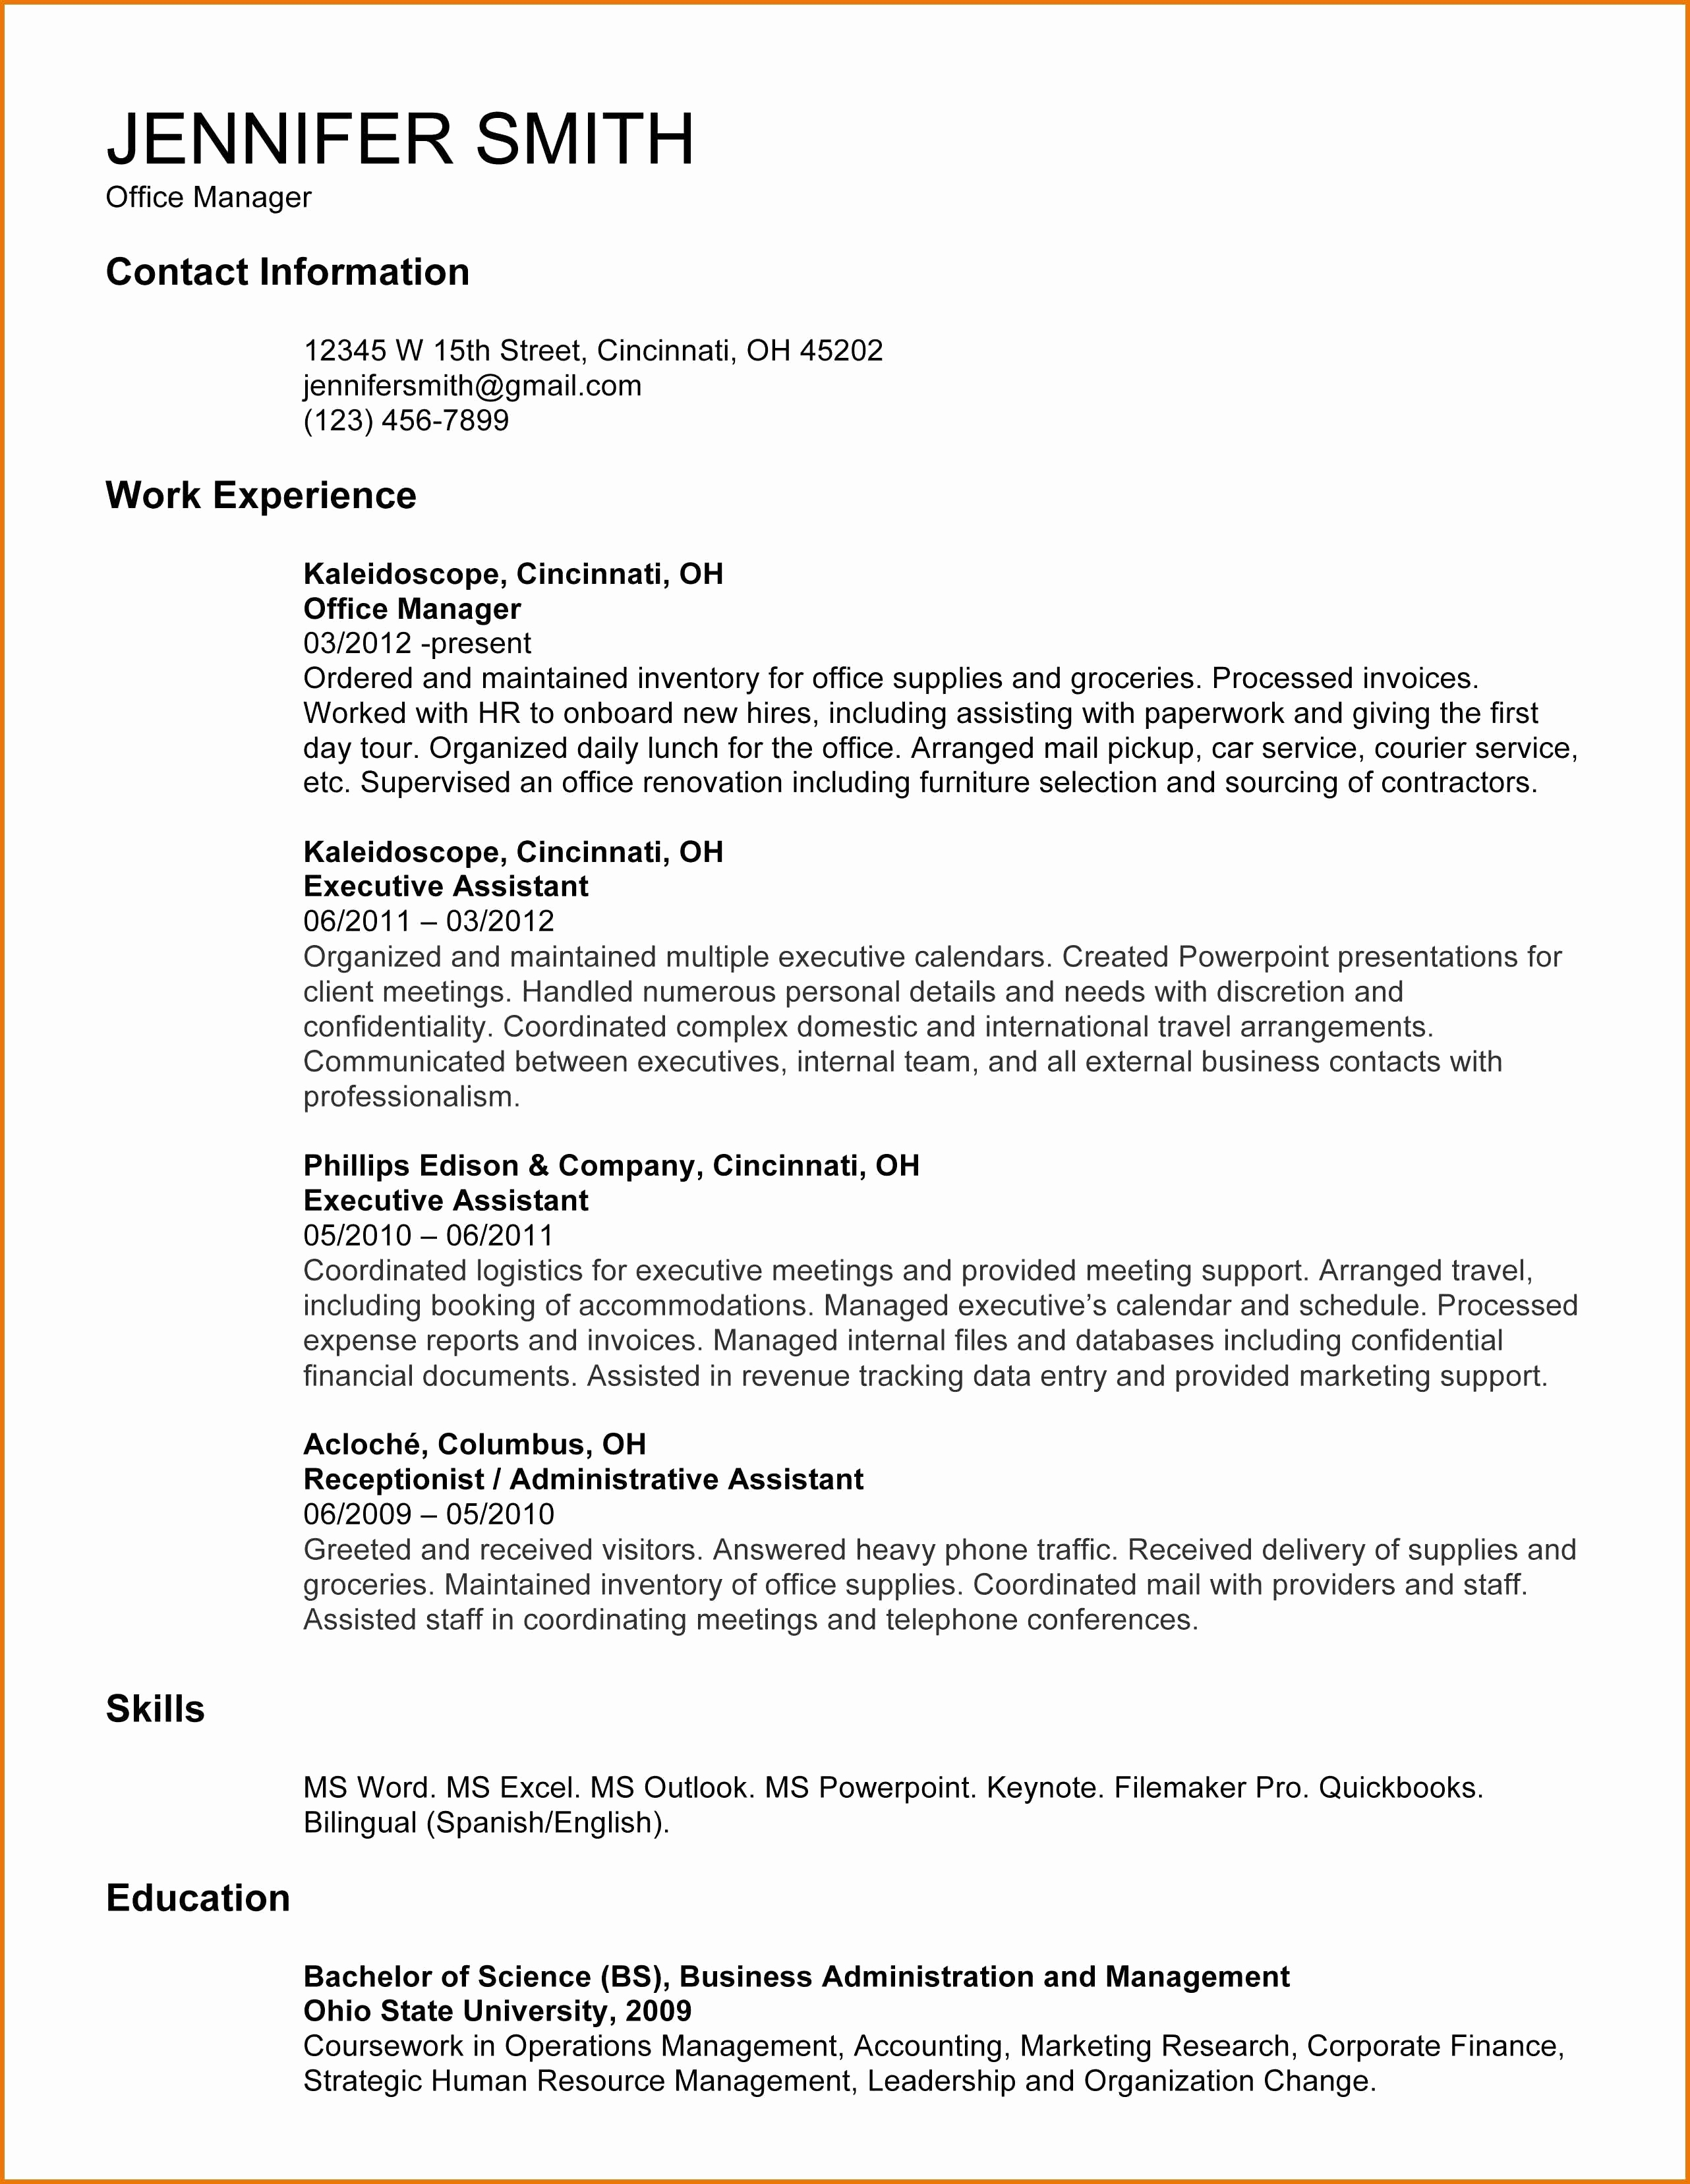 Hiring Letter Template - Best Resume and Cover Letter Template